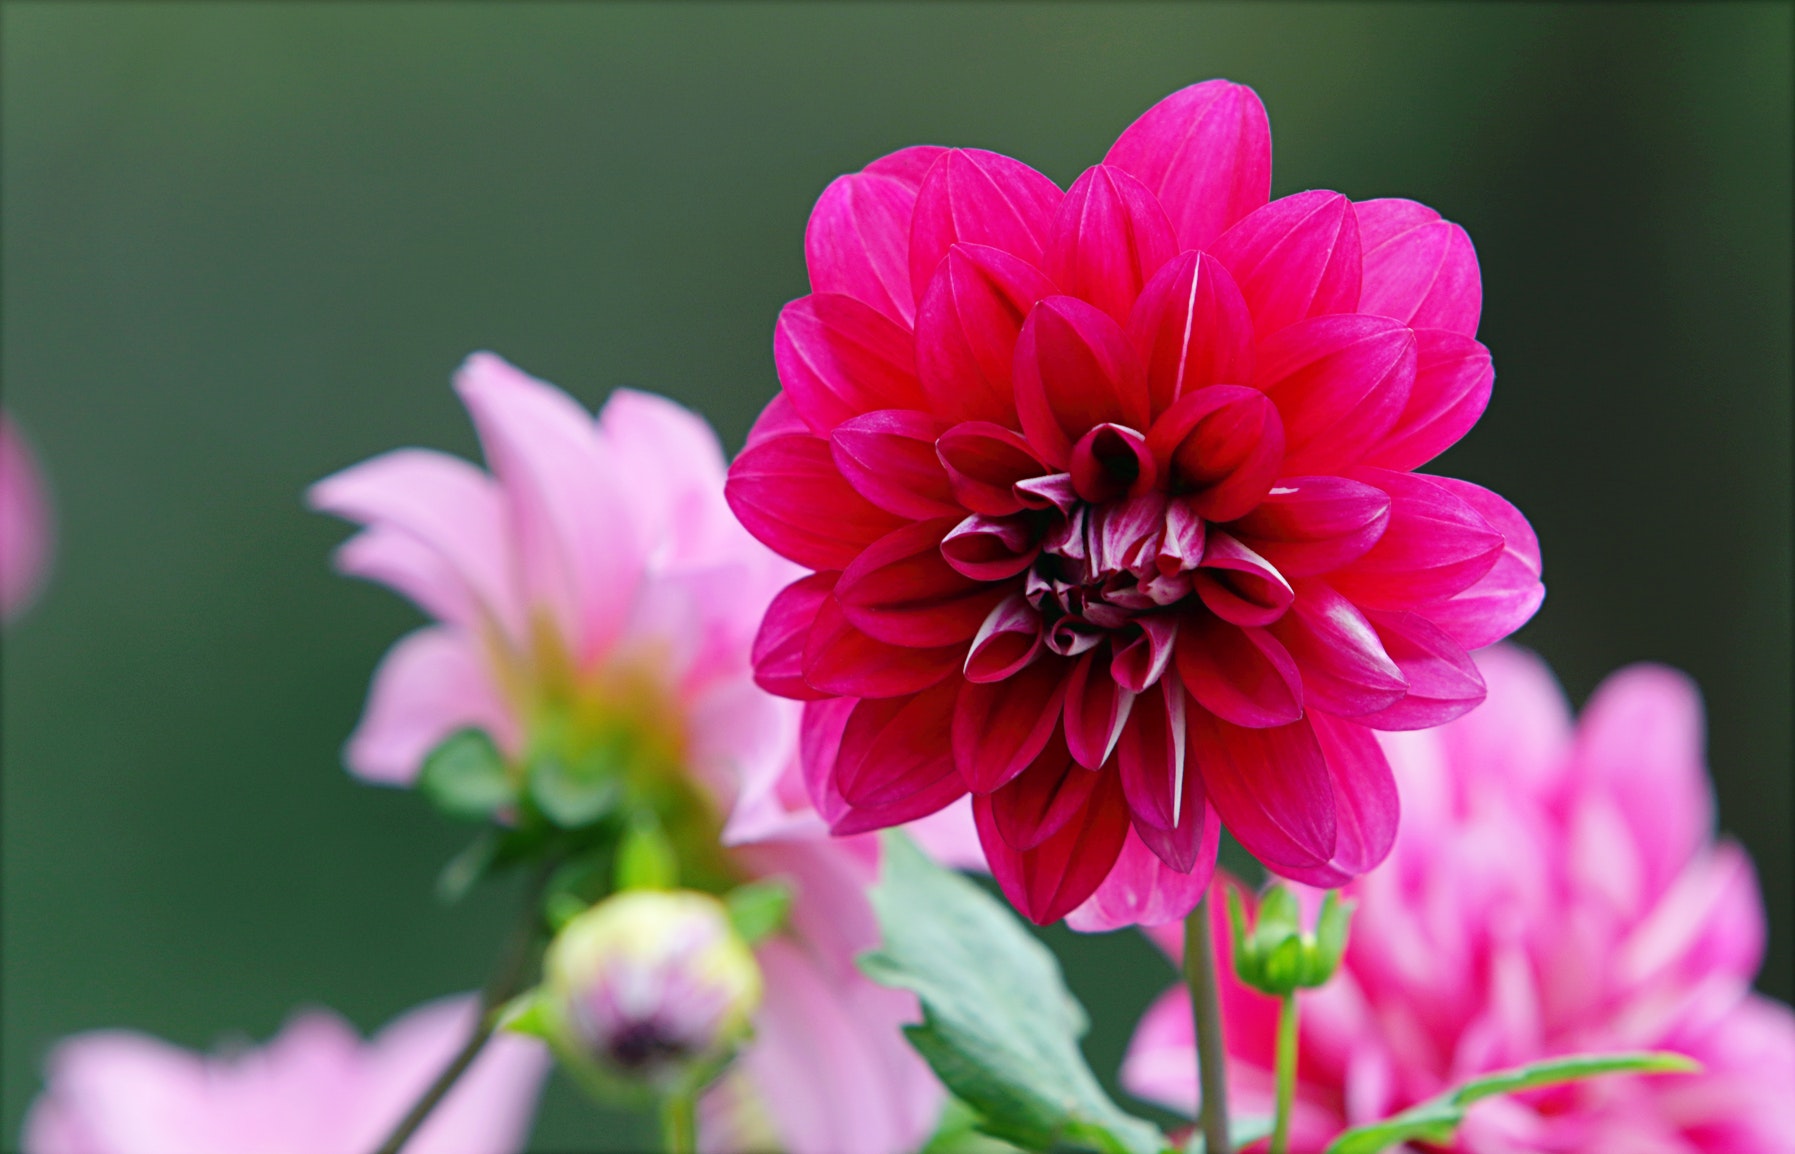 Pink and Purple Flowers, Beautiful, Flora, Outdoors, Leaves, HQ Photo